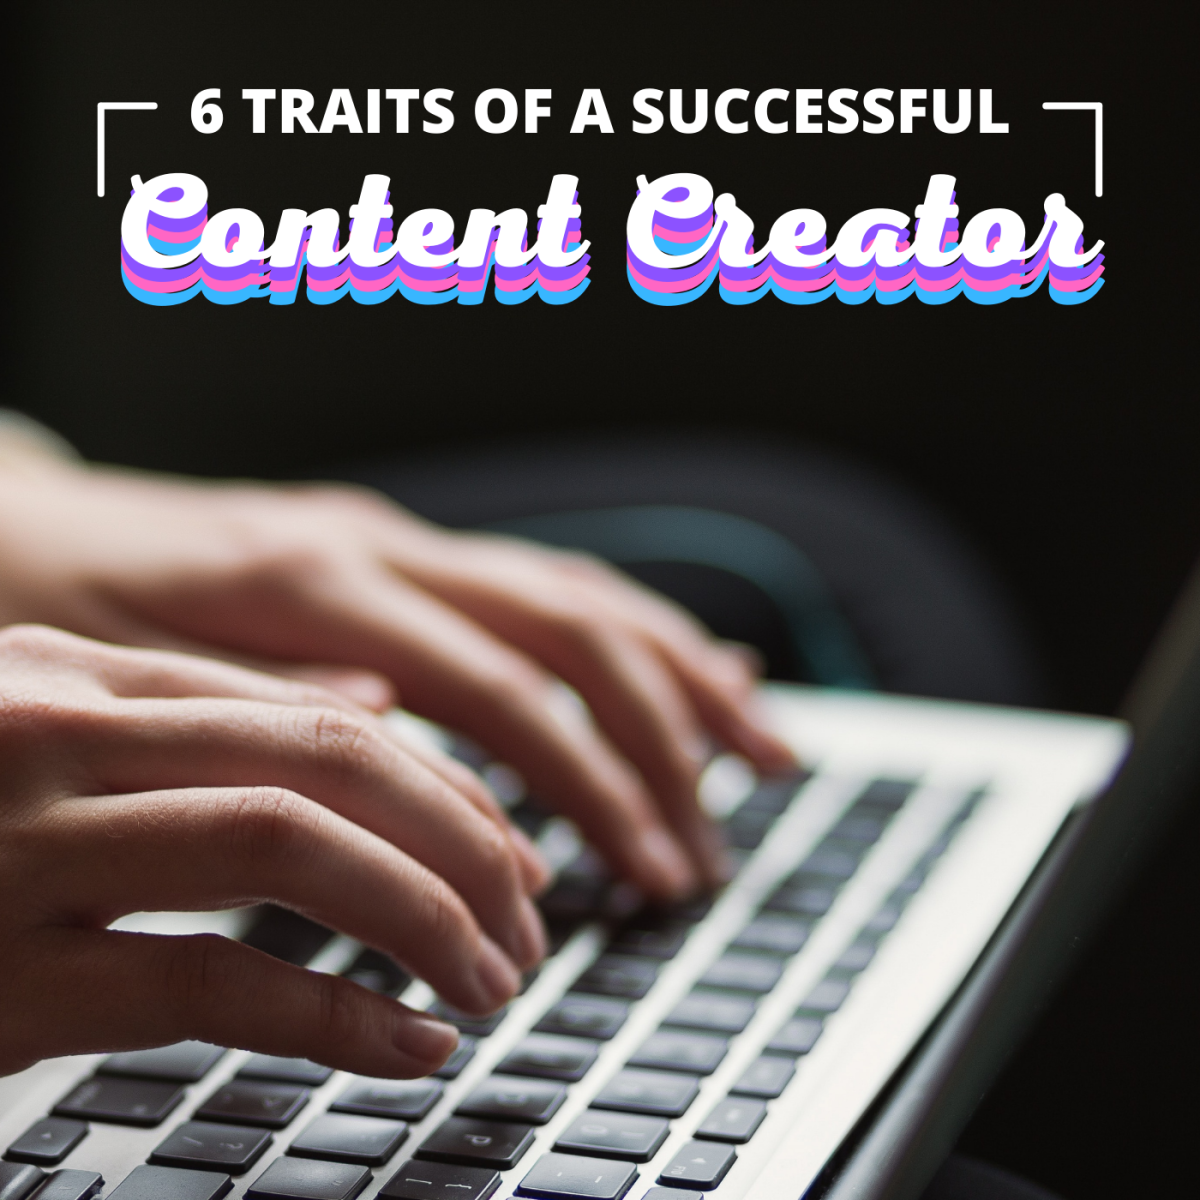 The 6 Traits of a Successful Content Creator